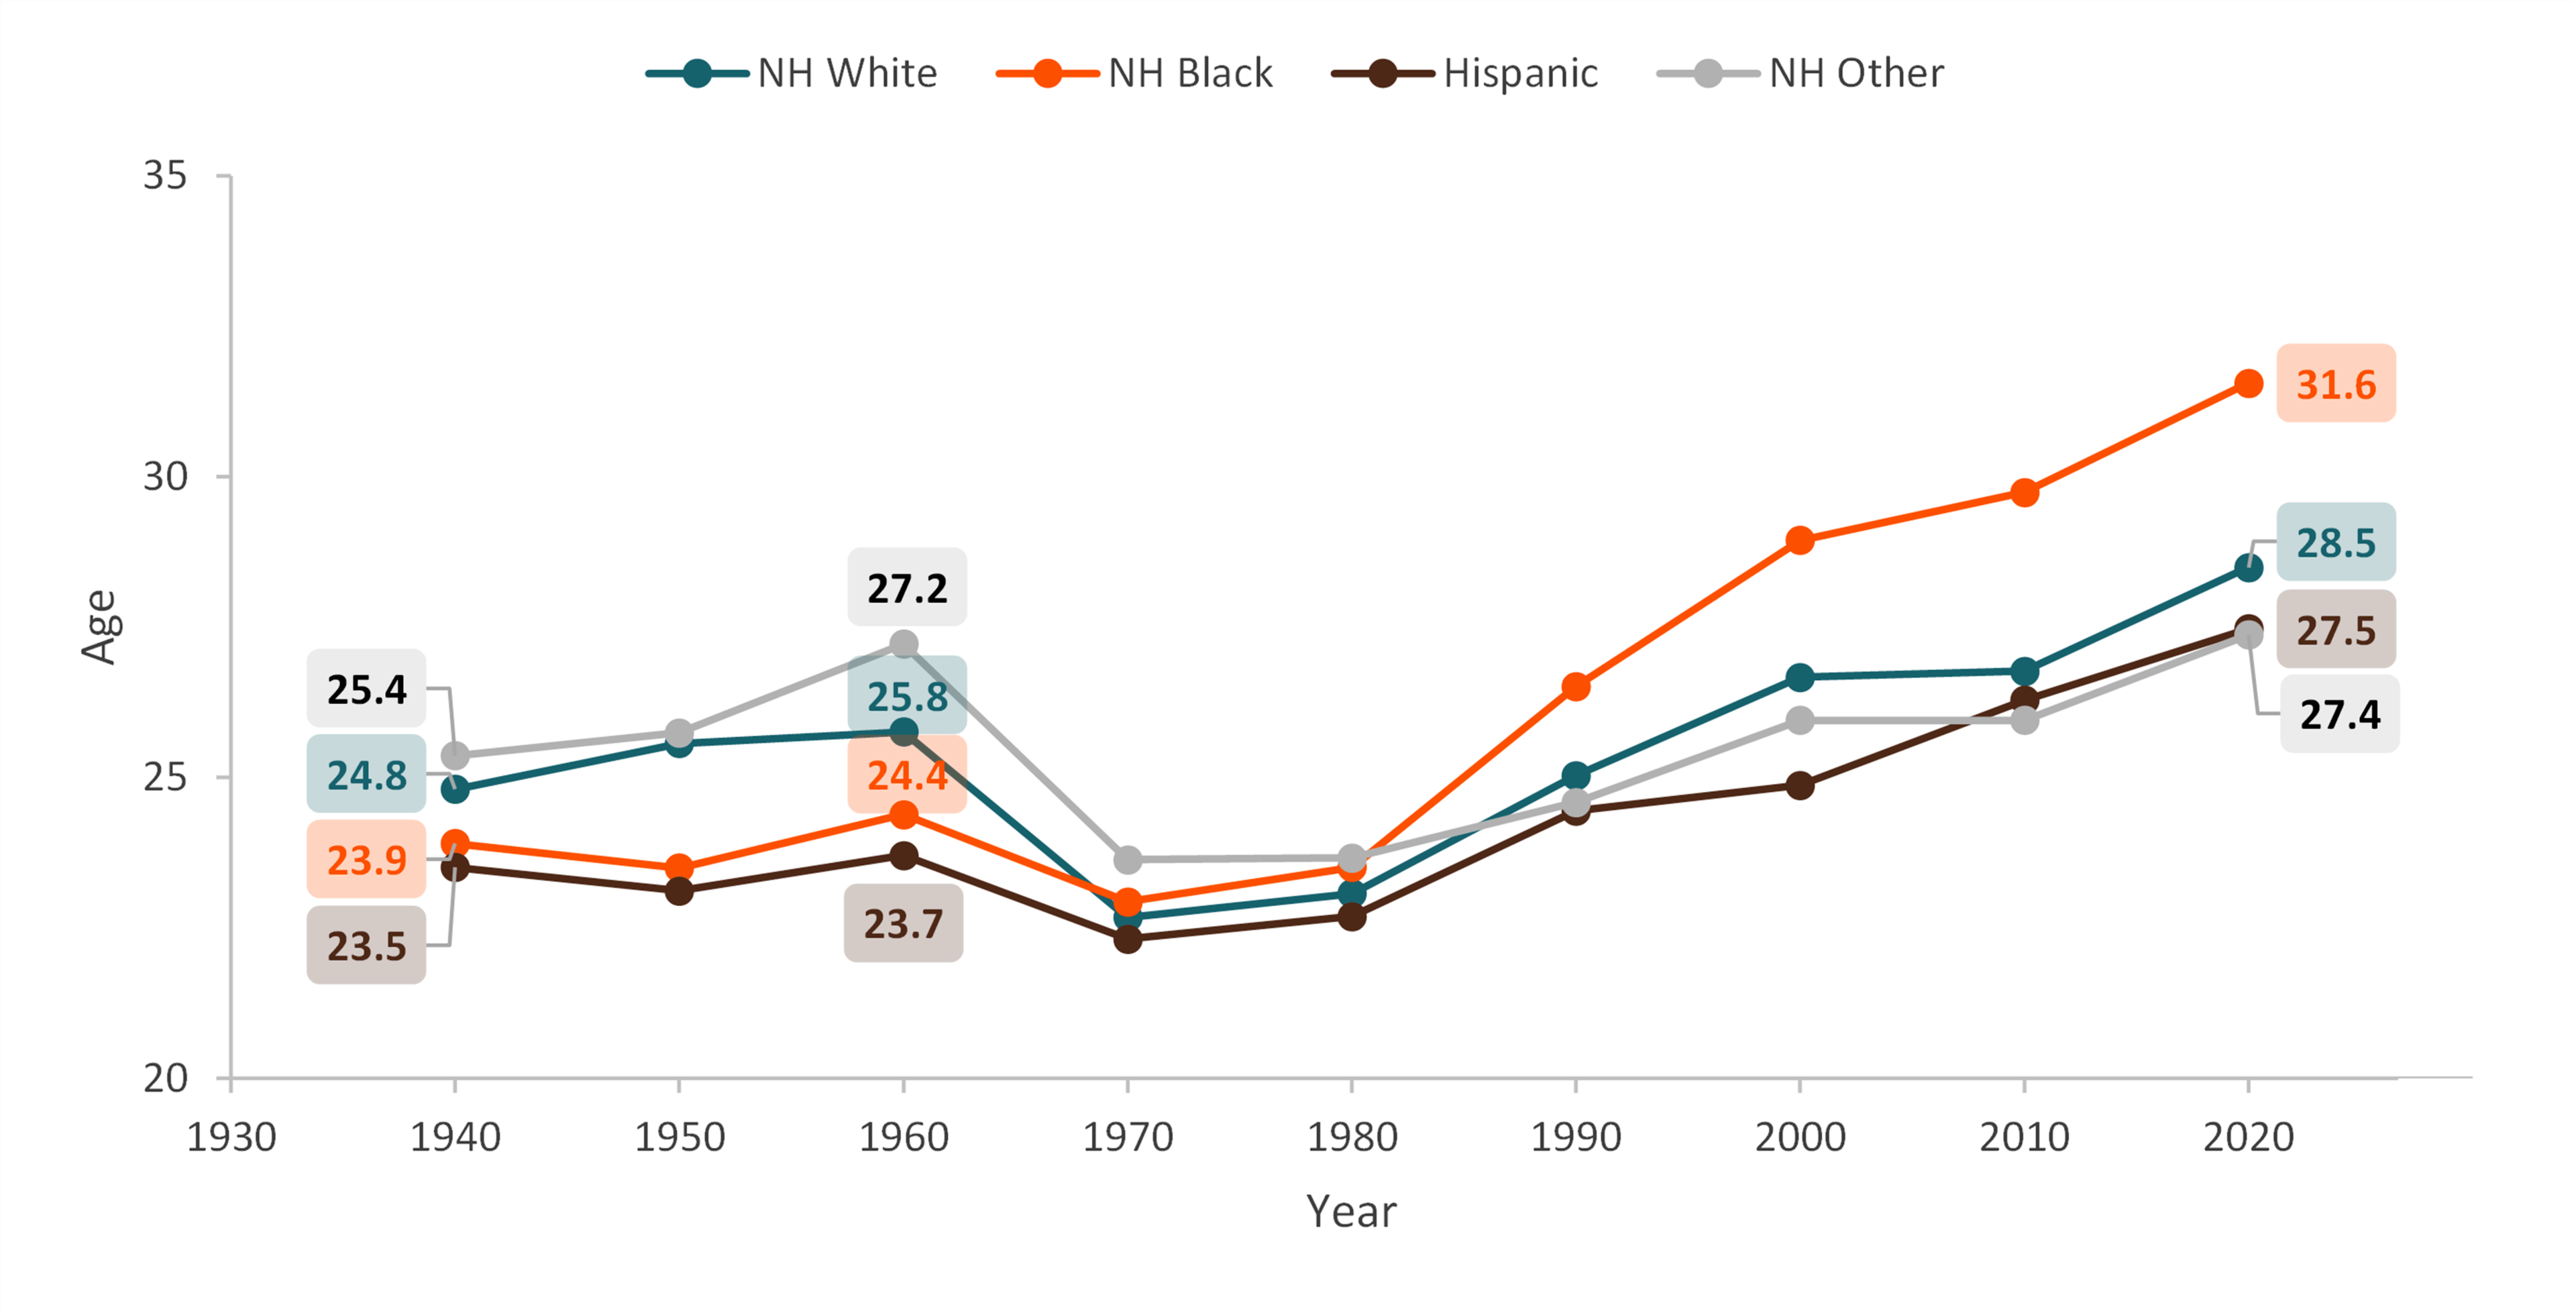 graph showing Figure 2. Median Age of Never Married Adults by Race & Ethnicity, 1940-2020